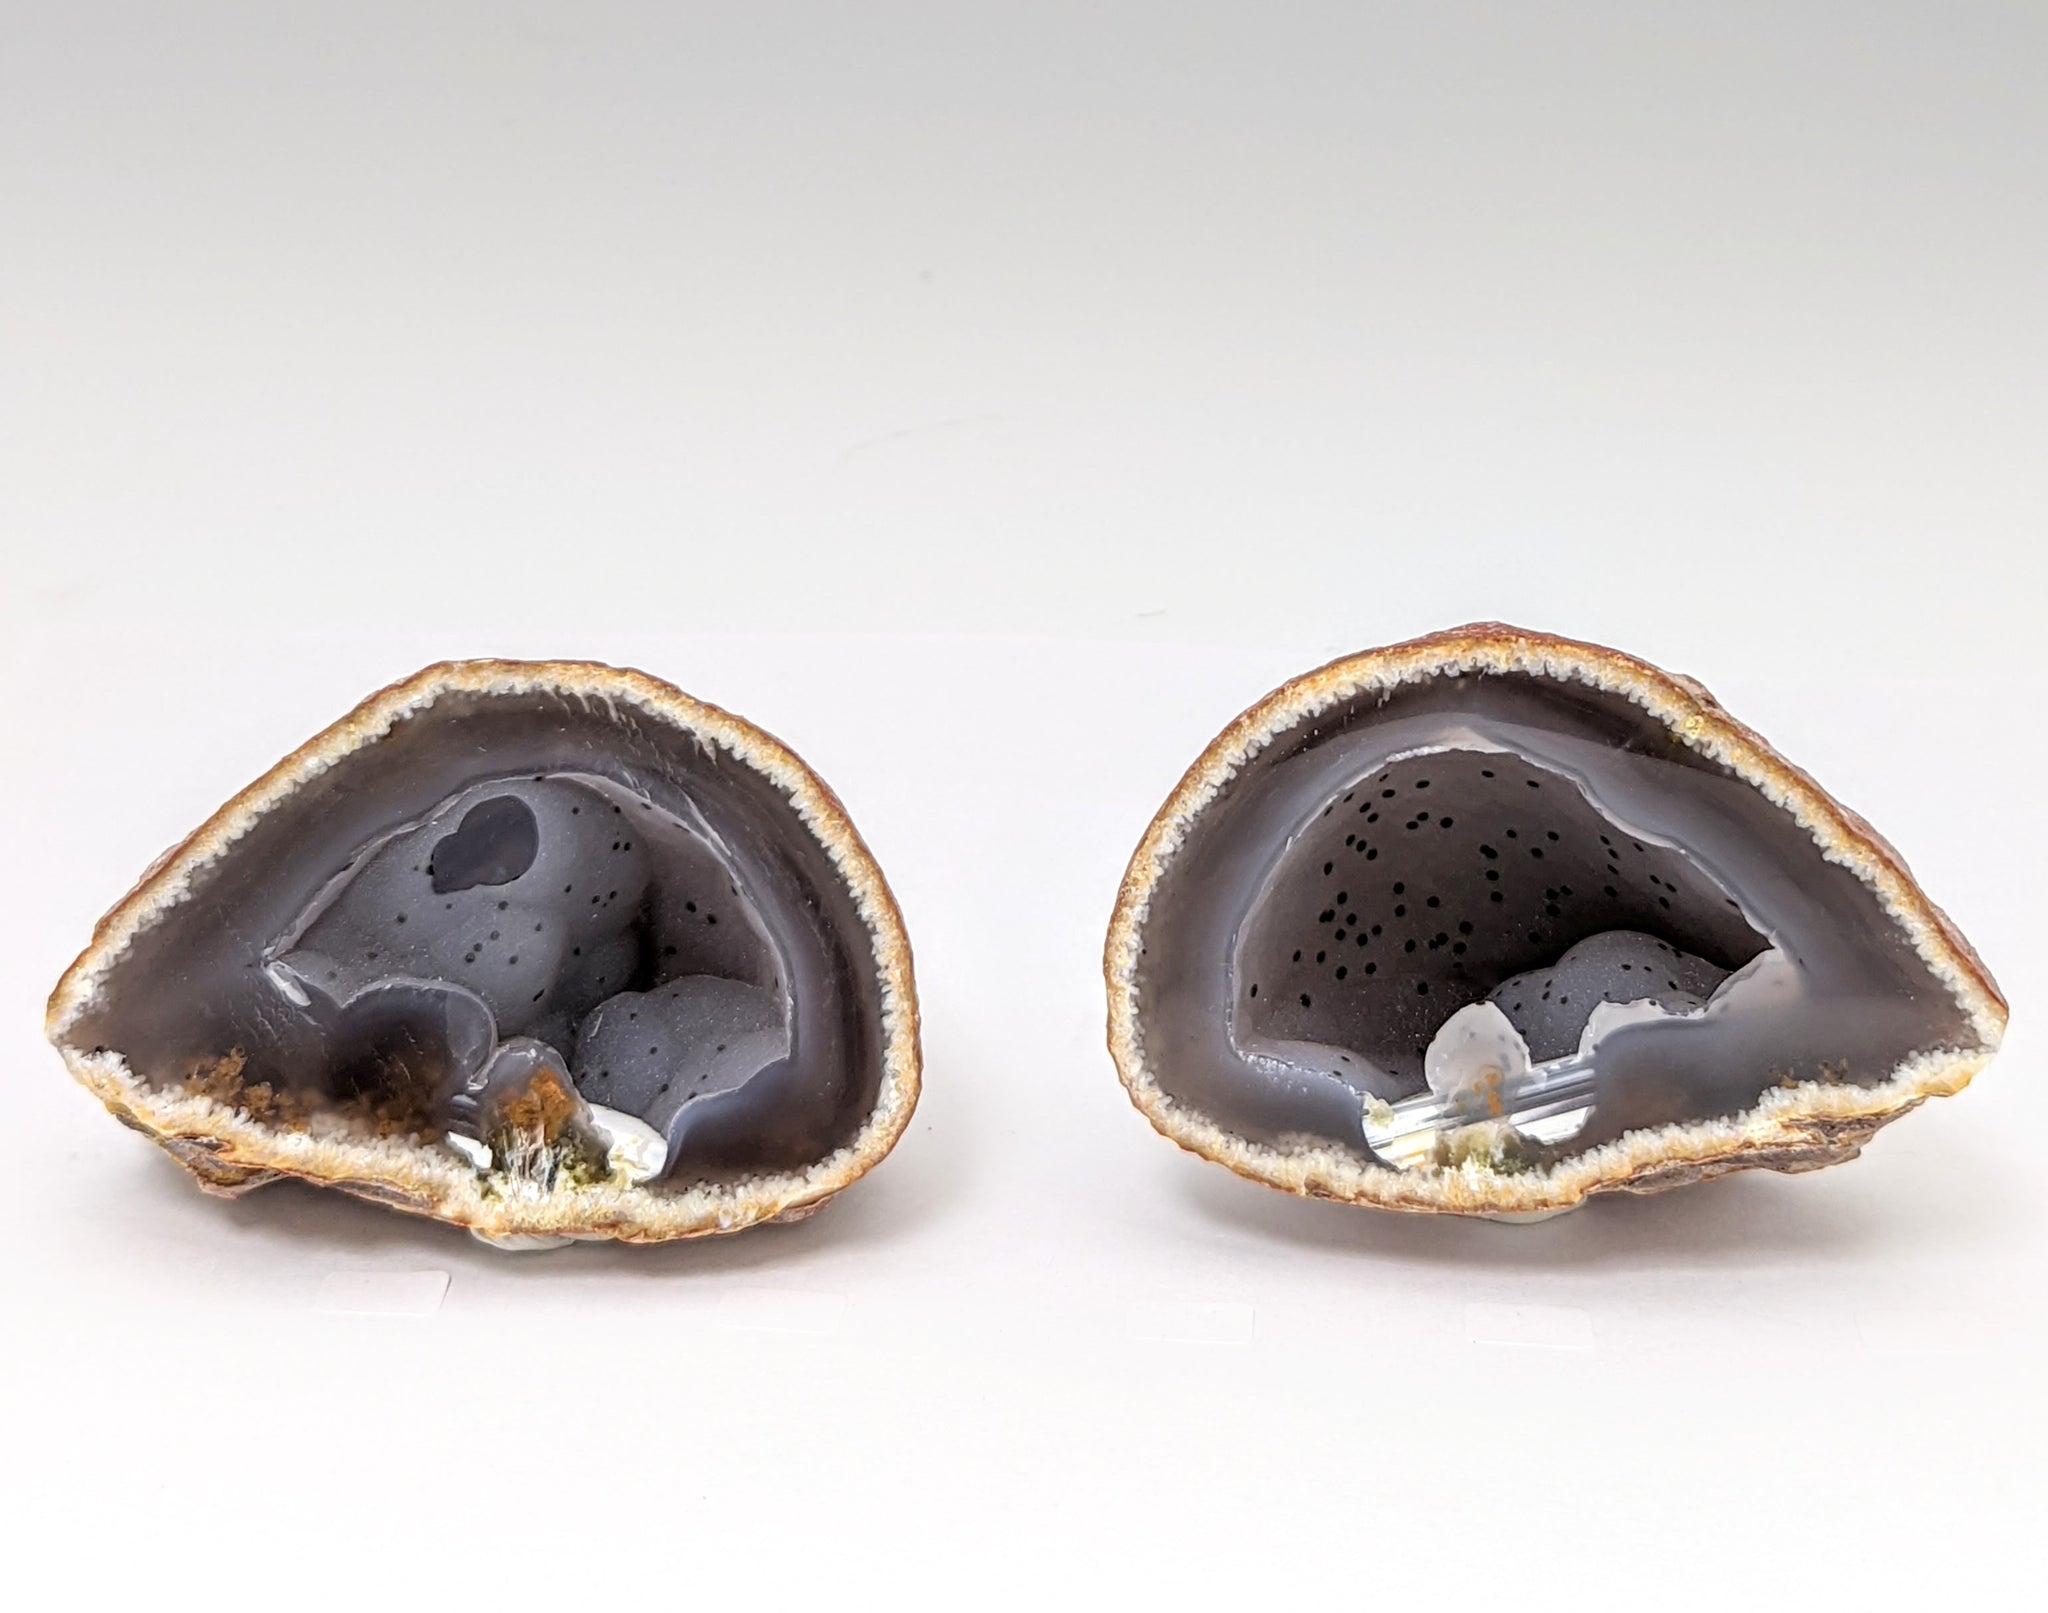 Mexican Ocho Geode With Black SPeckles and Druzy Inside